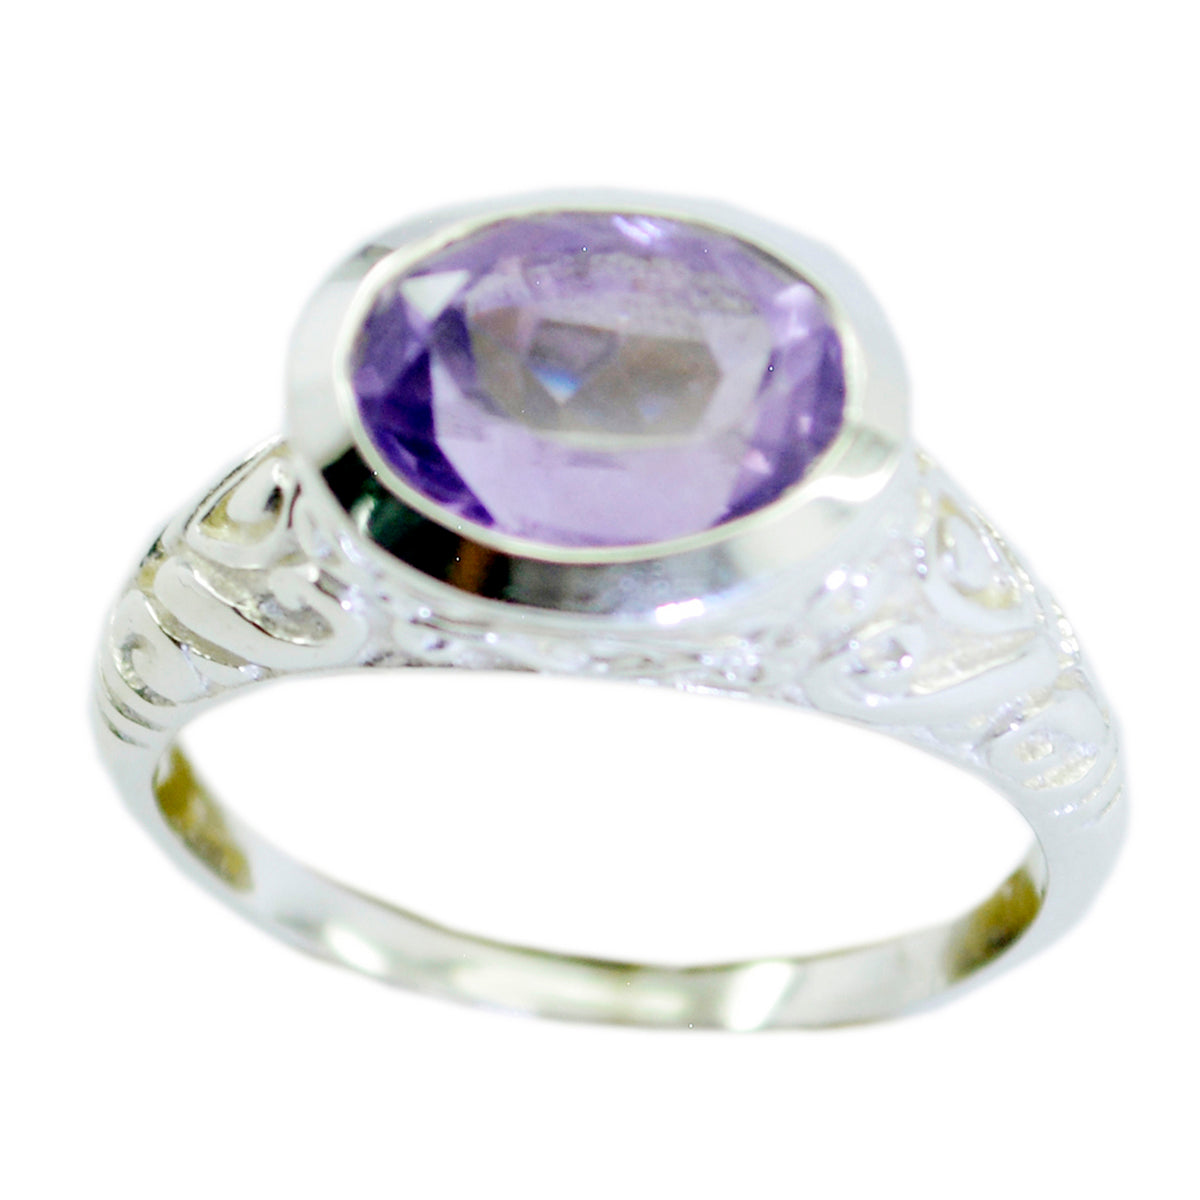 Gorgeous Gemstone Amethyst 925 Sterling Silver Ring Angel Wing Jewelry